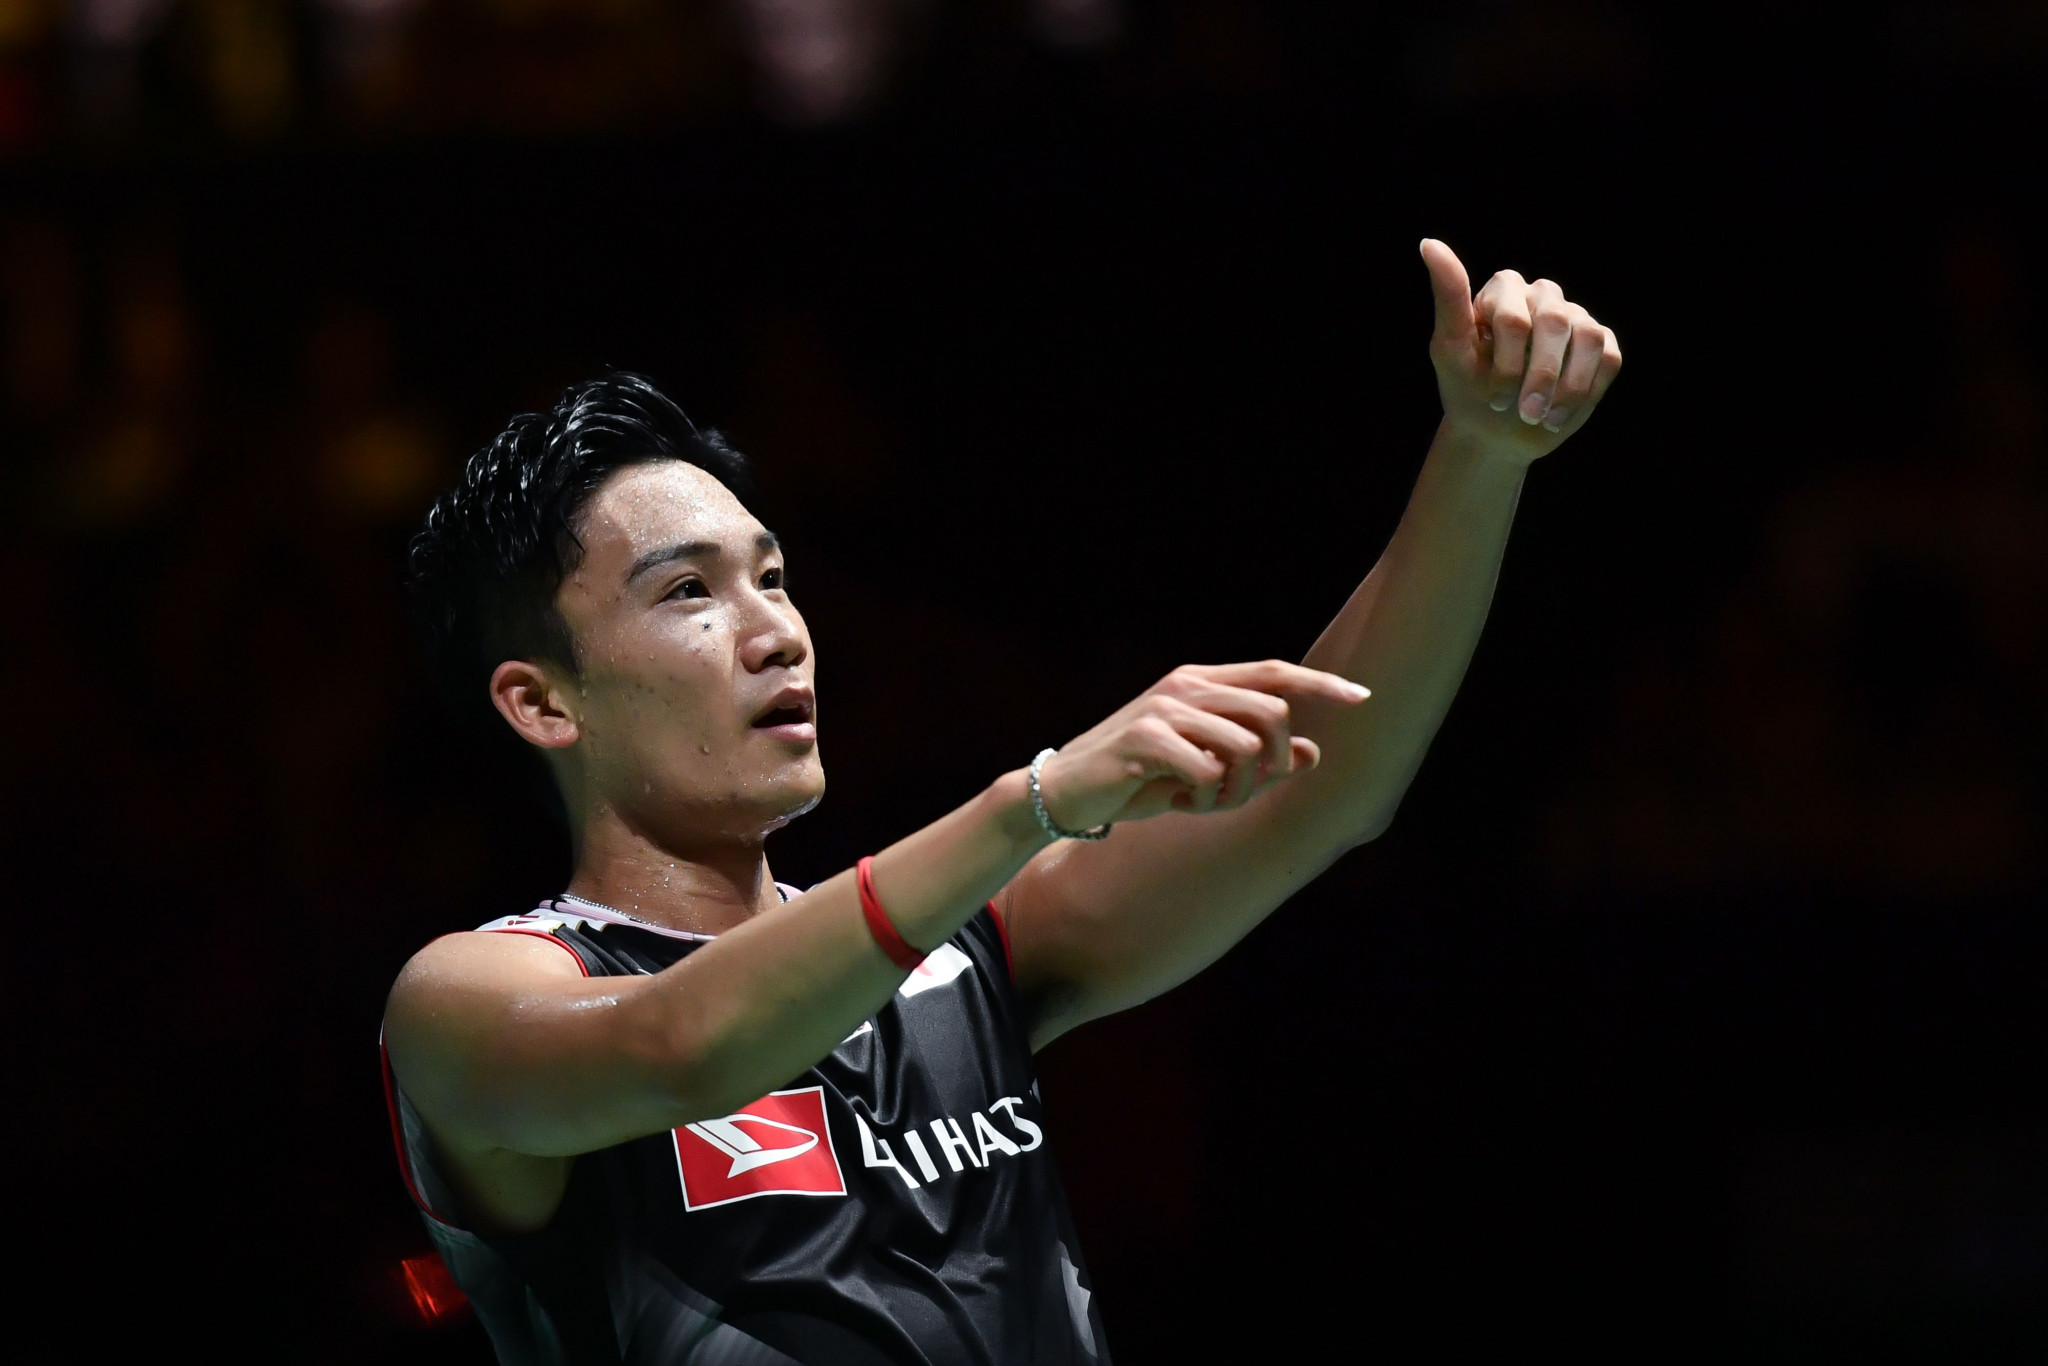 Kento Momota retained his men's singles world title ©Getty Images